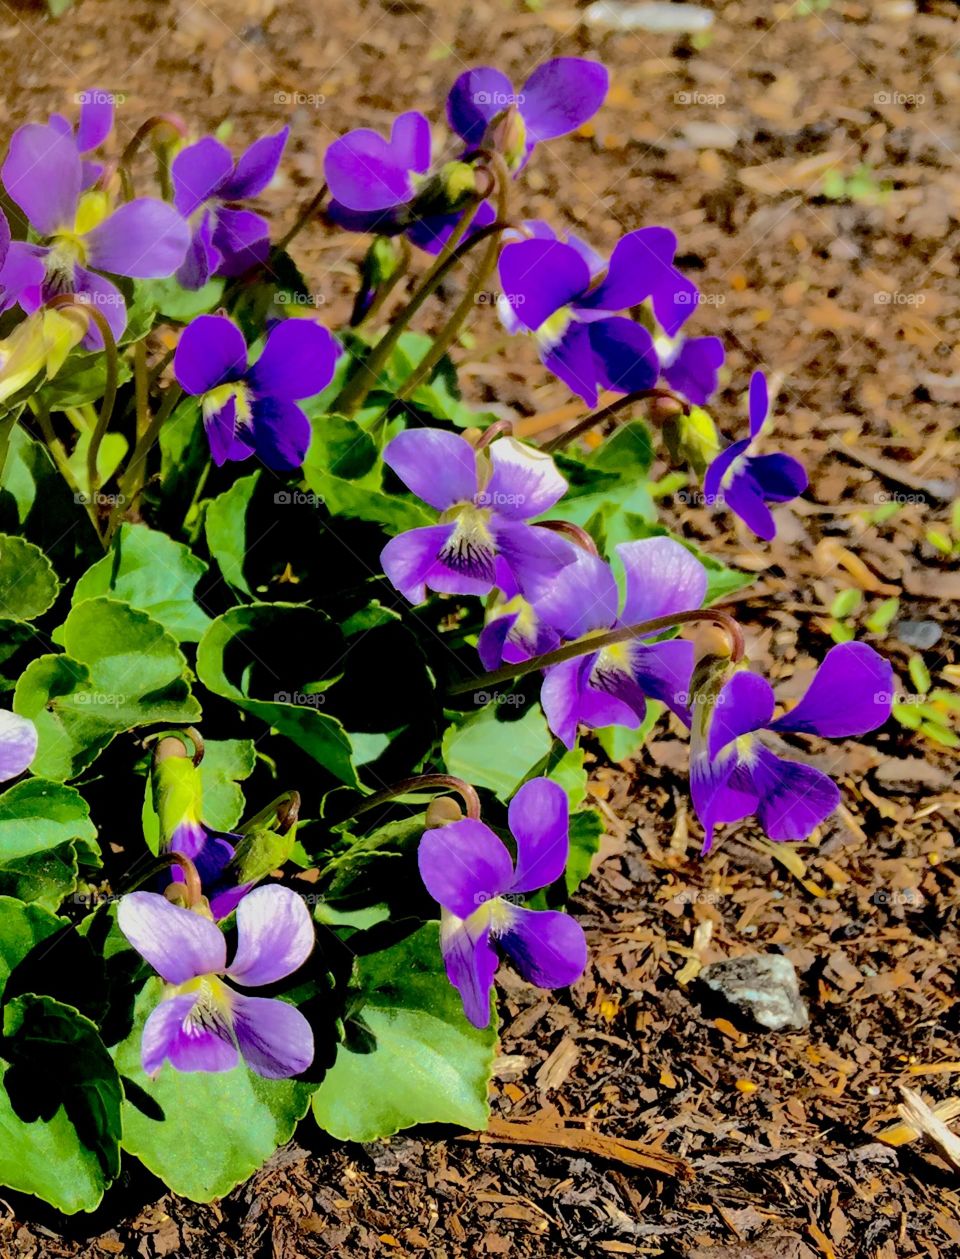 Violets are my sister's favorite